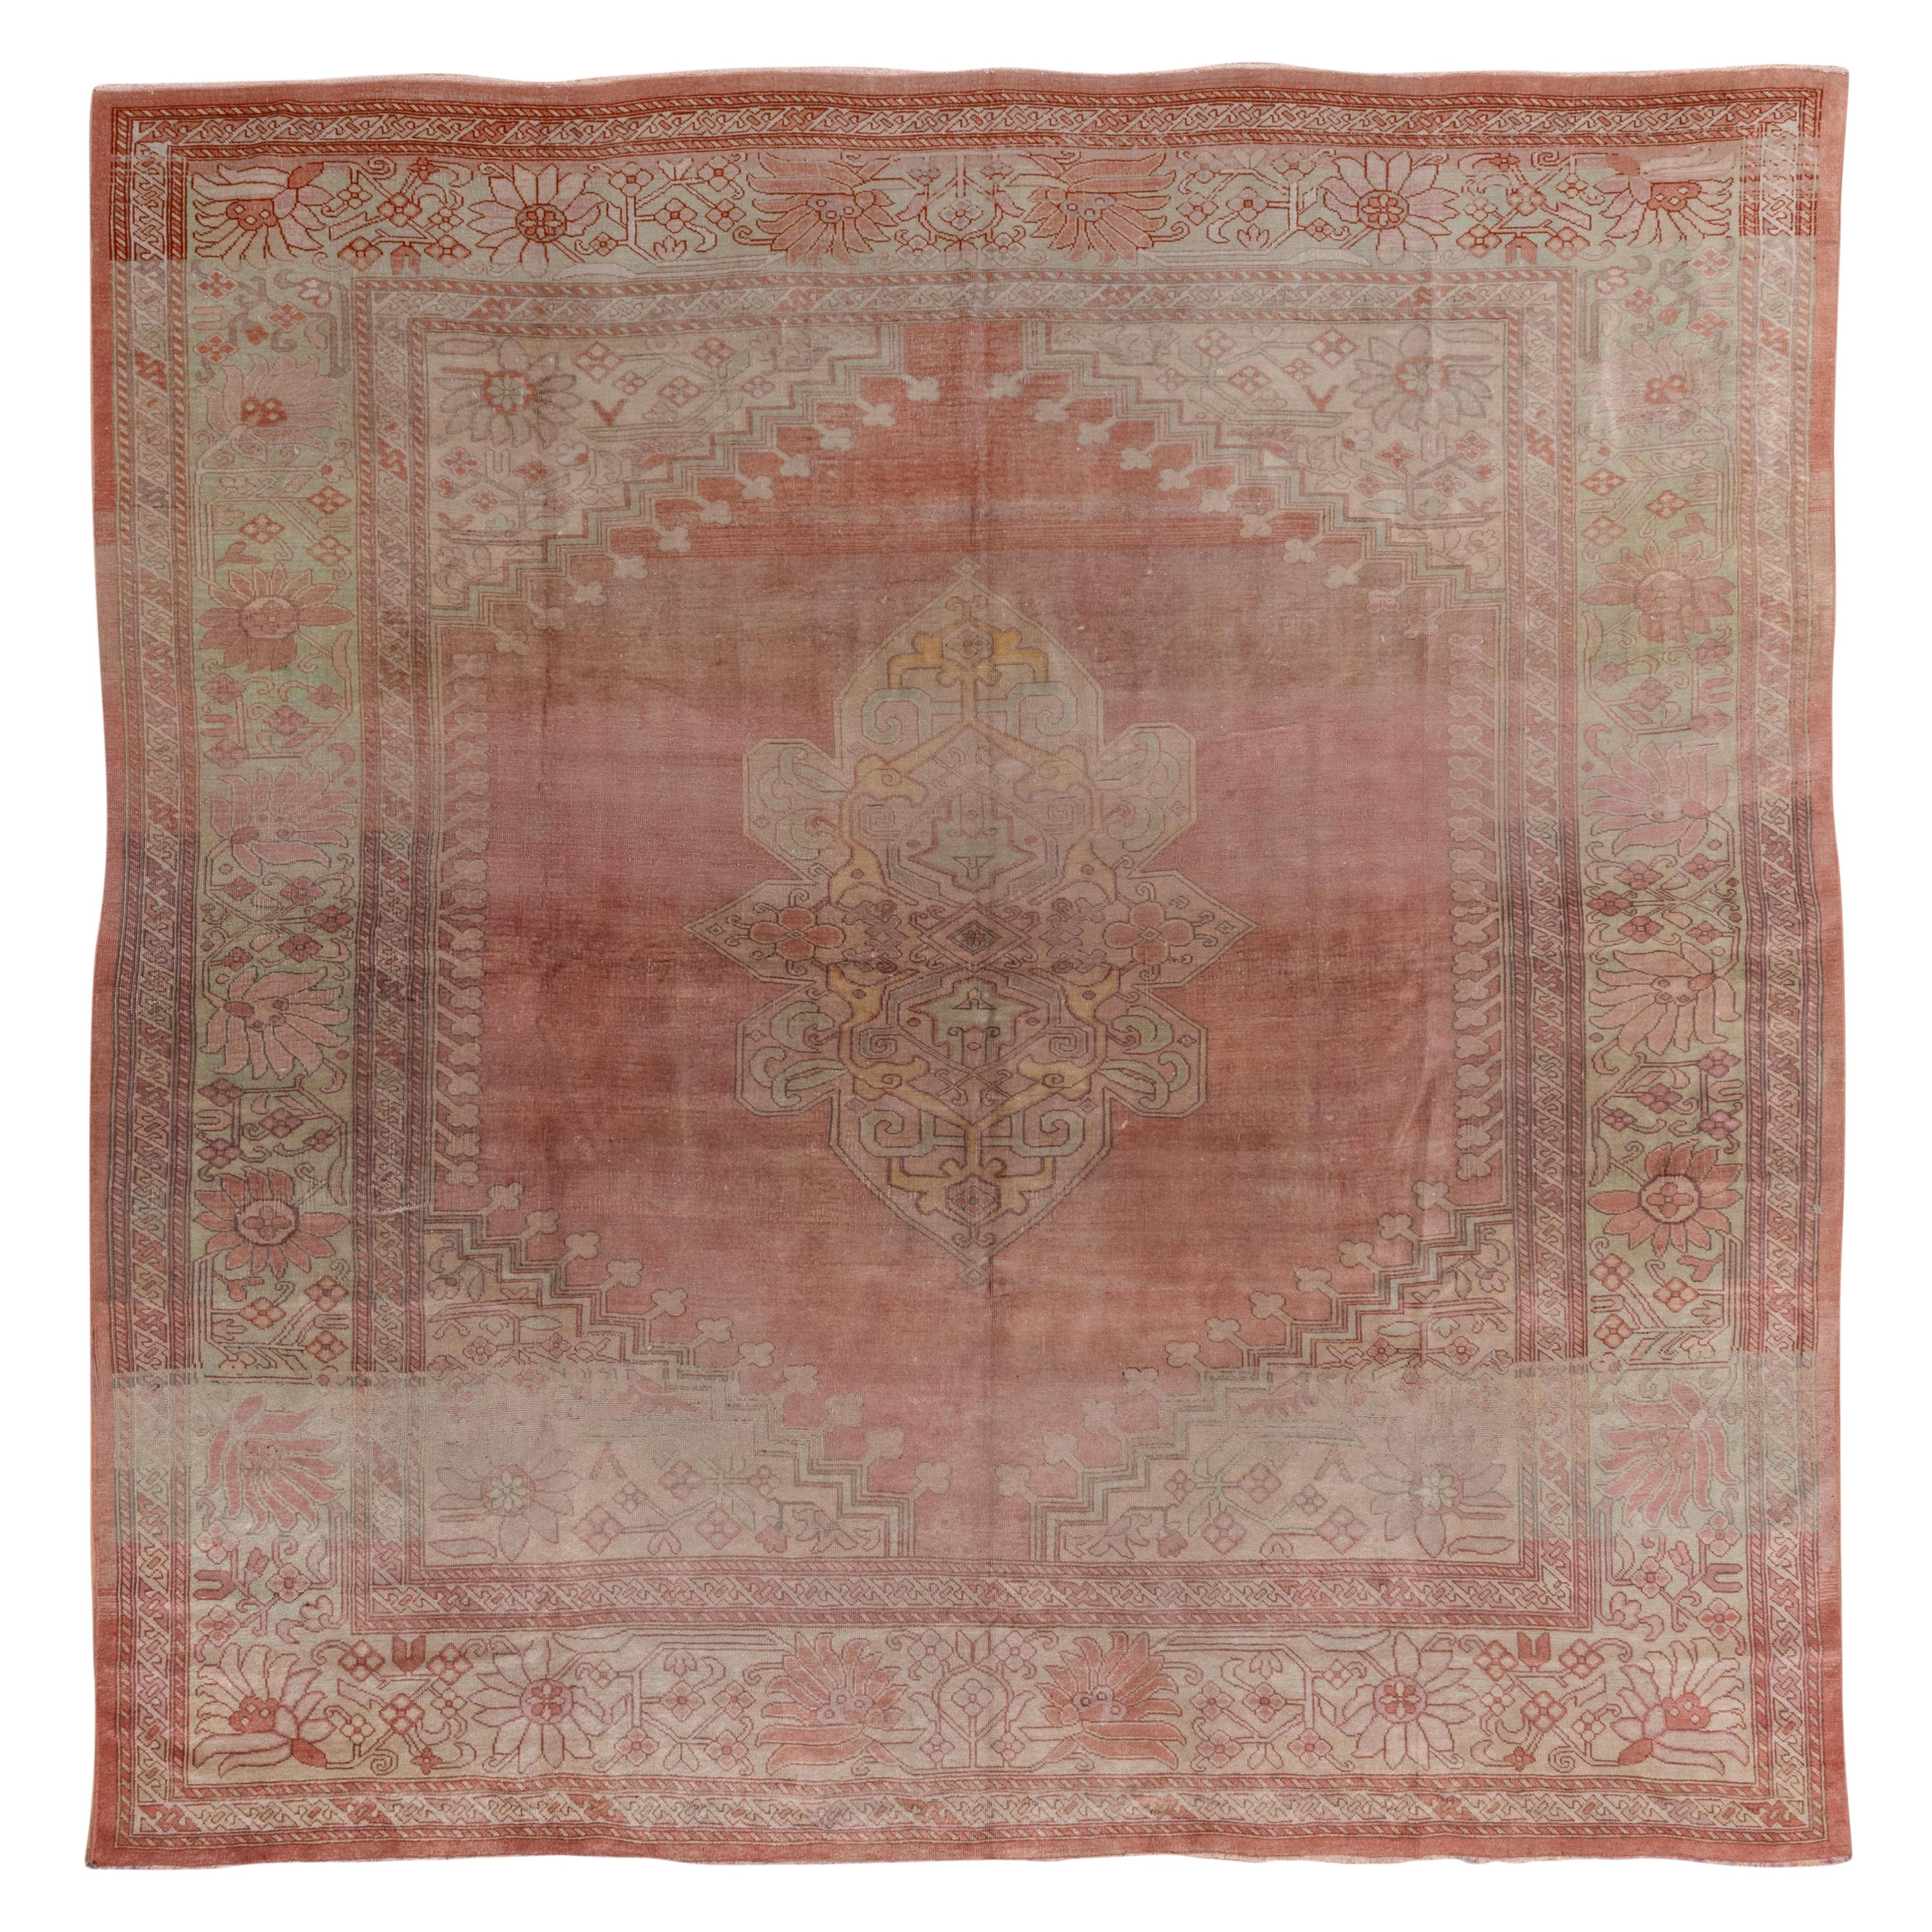 Antique Square Oushak Carpet, Pink Field, Lightly Distressed